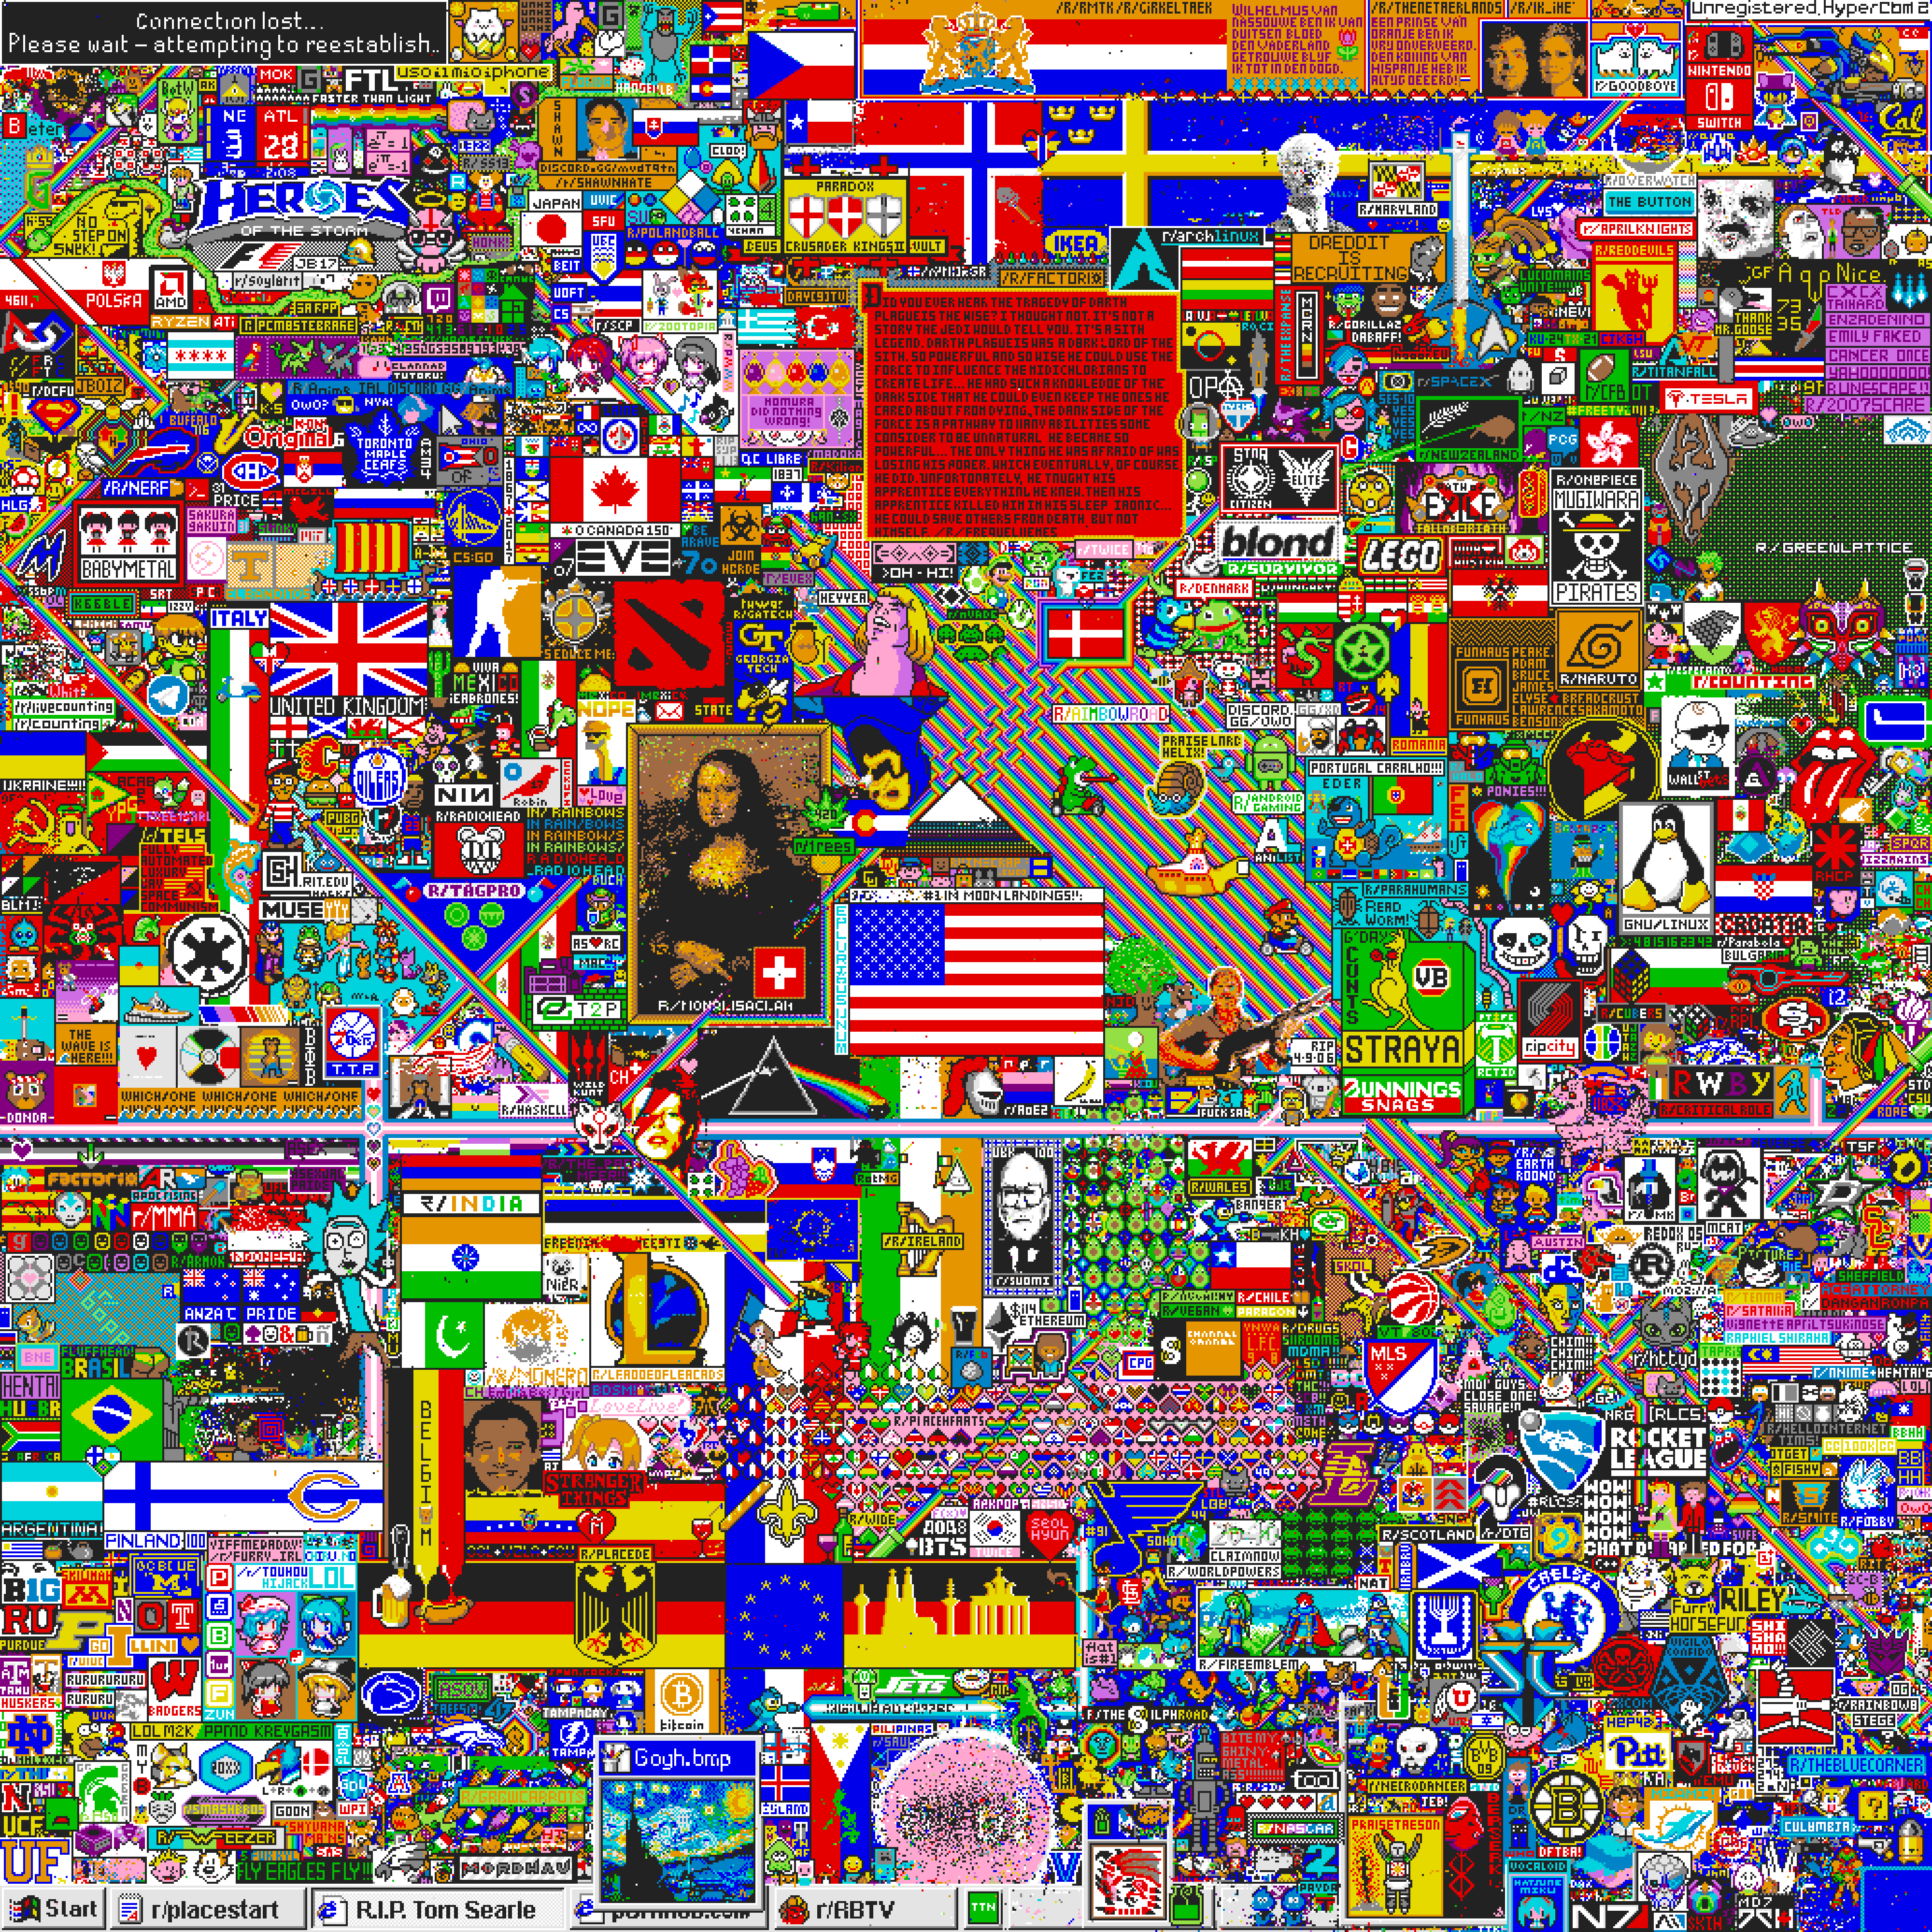 Reddit Place: The Final Canvas from /r/place